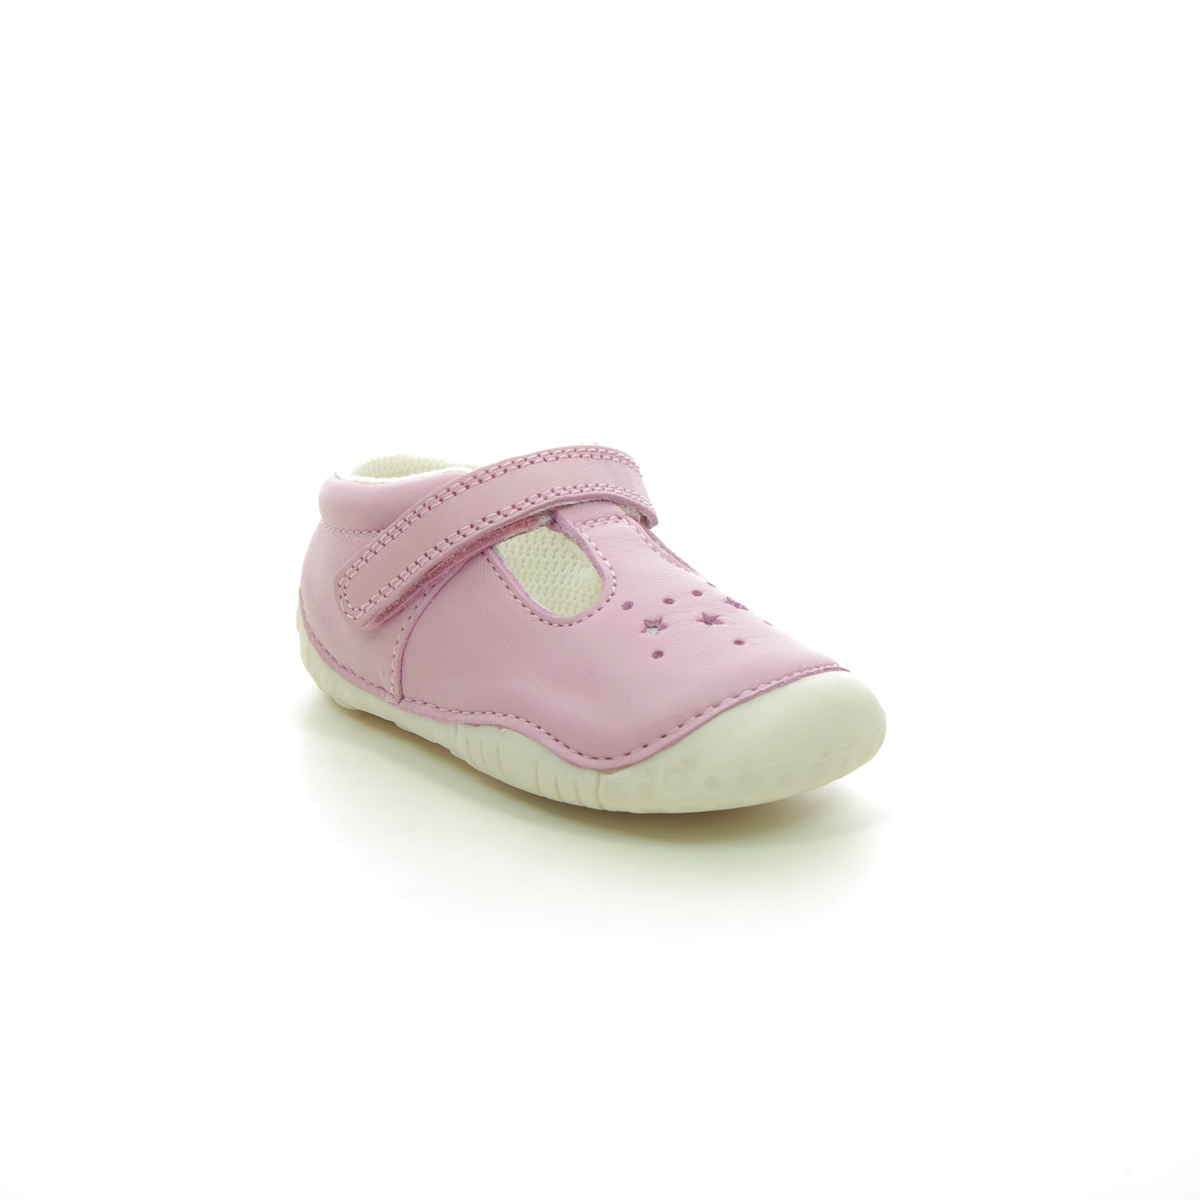 Start Rite - Tumble T Bar In Pink Leather 0761-66F In Size 2.5 In Plain Pink Leather First And Baby Shoes  In Pink Leather For kids